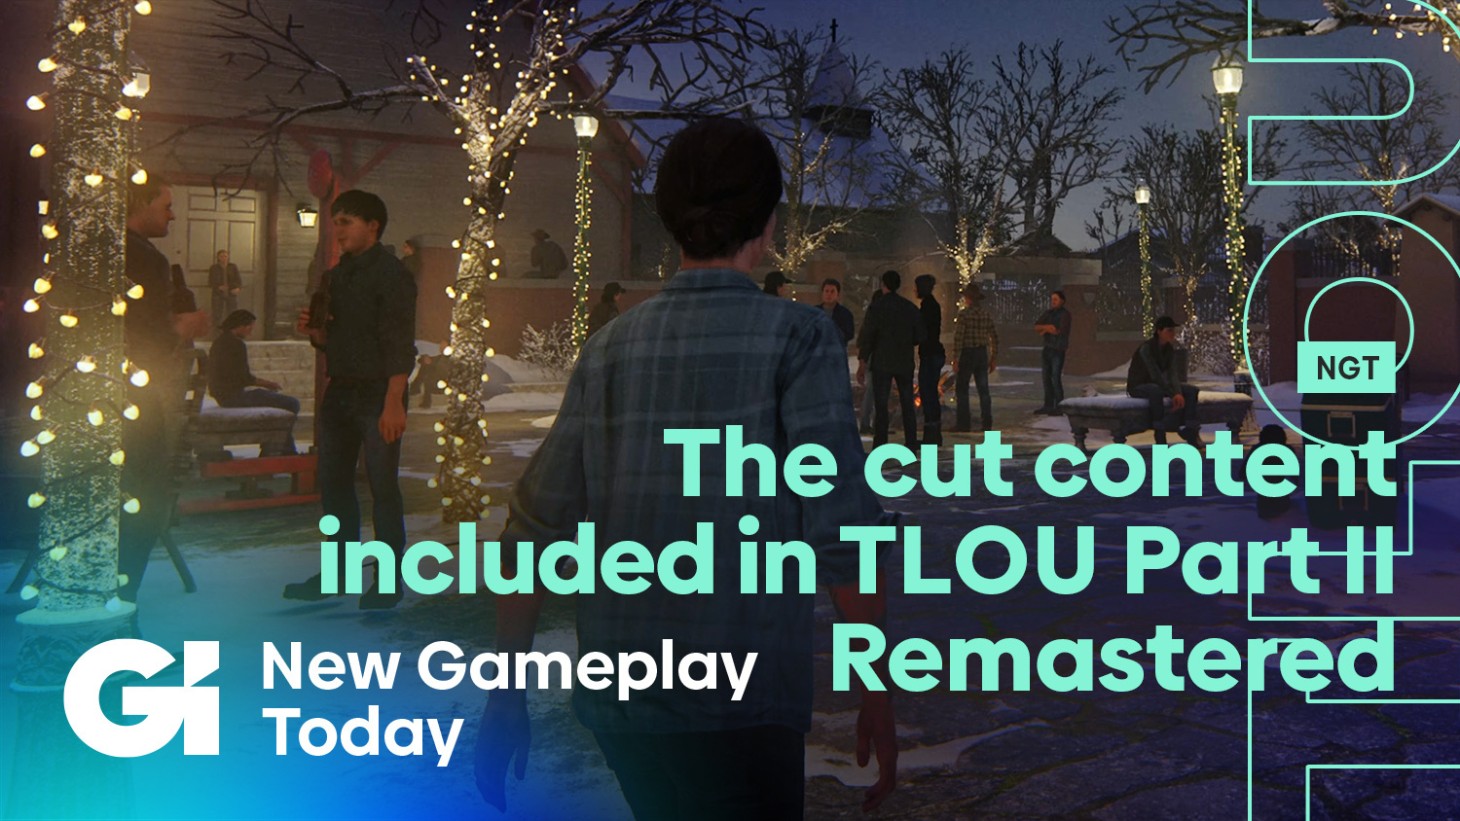 The Last of Us Part II Remastered Lost Levels Cut Content New Gameplay Today